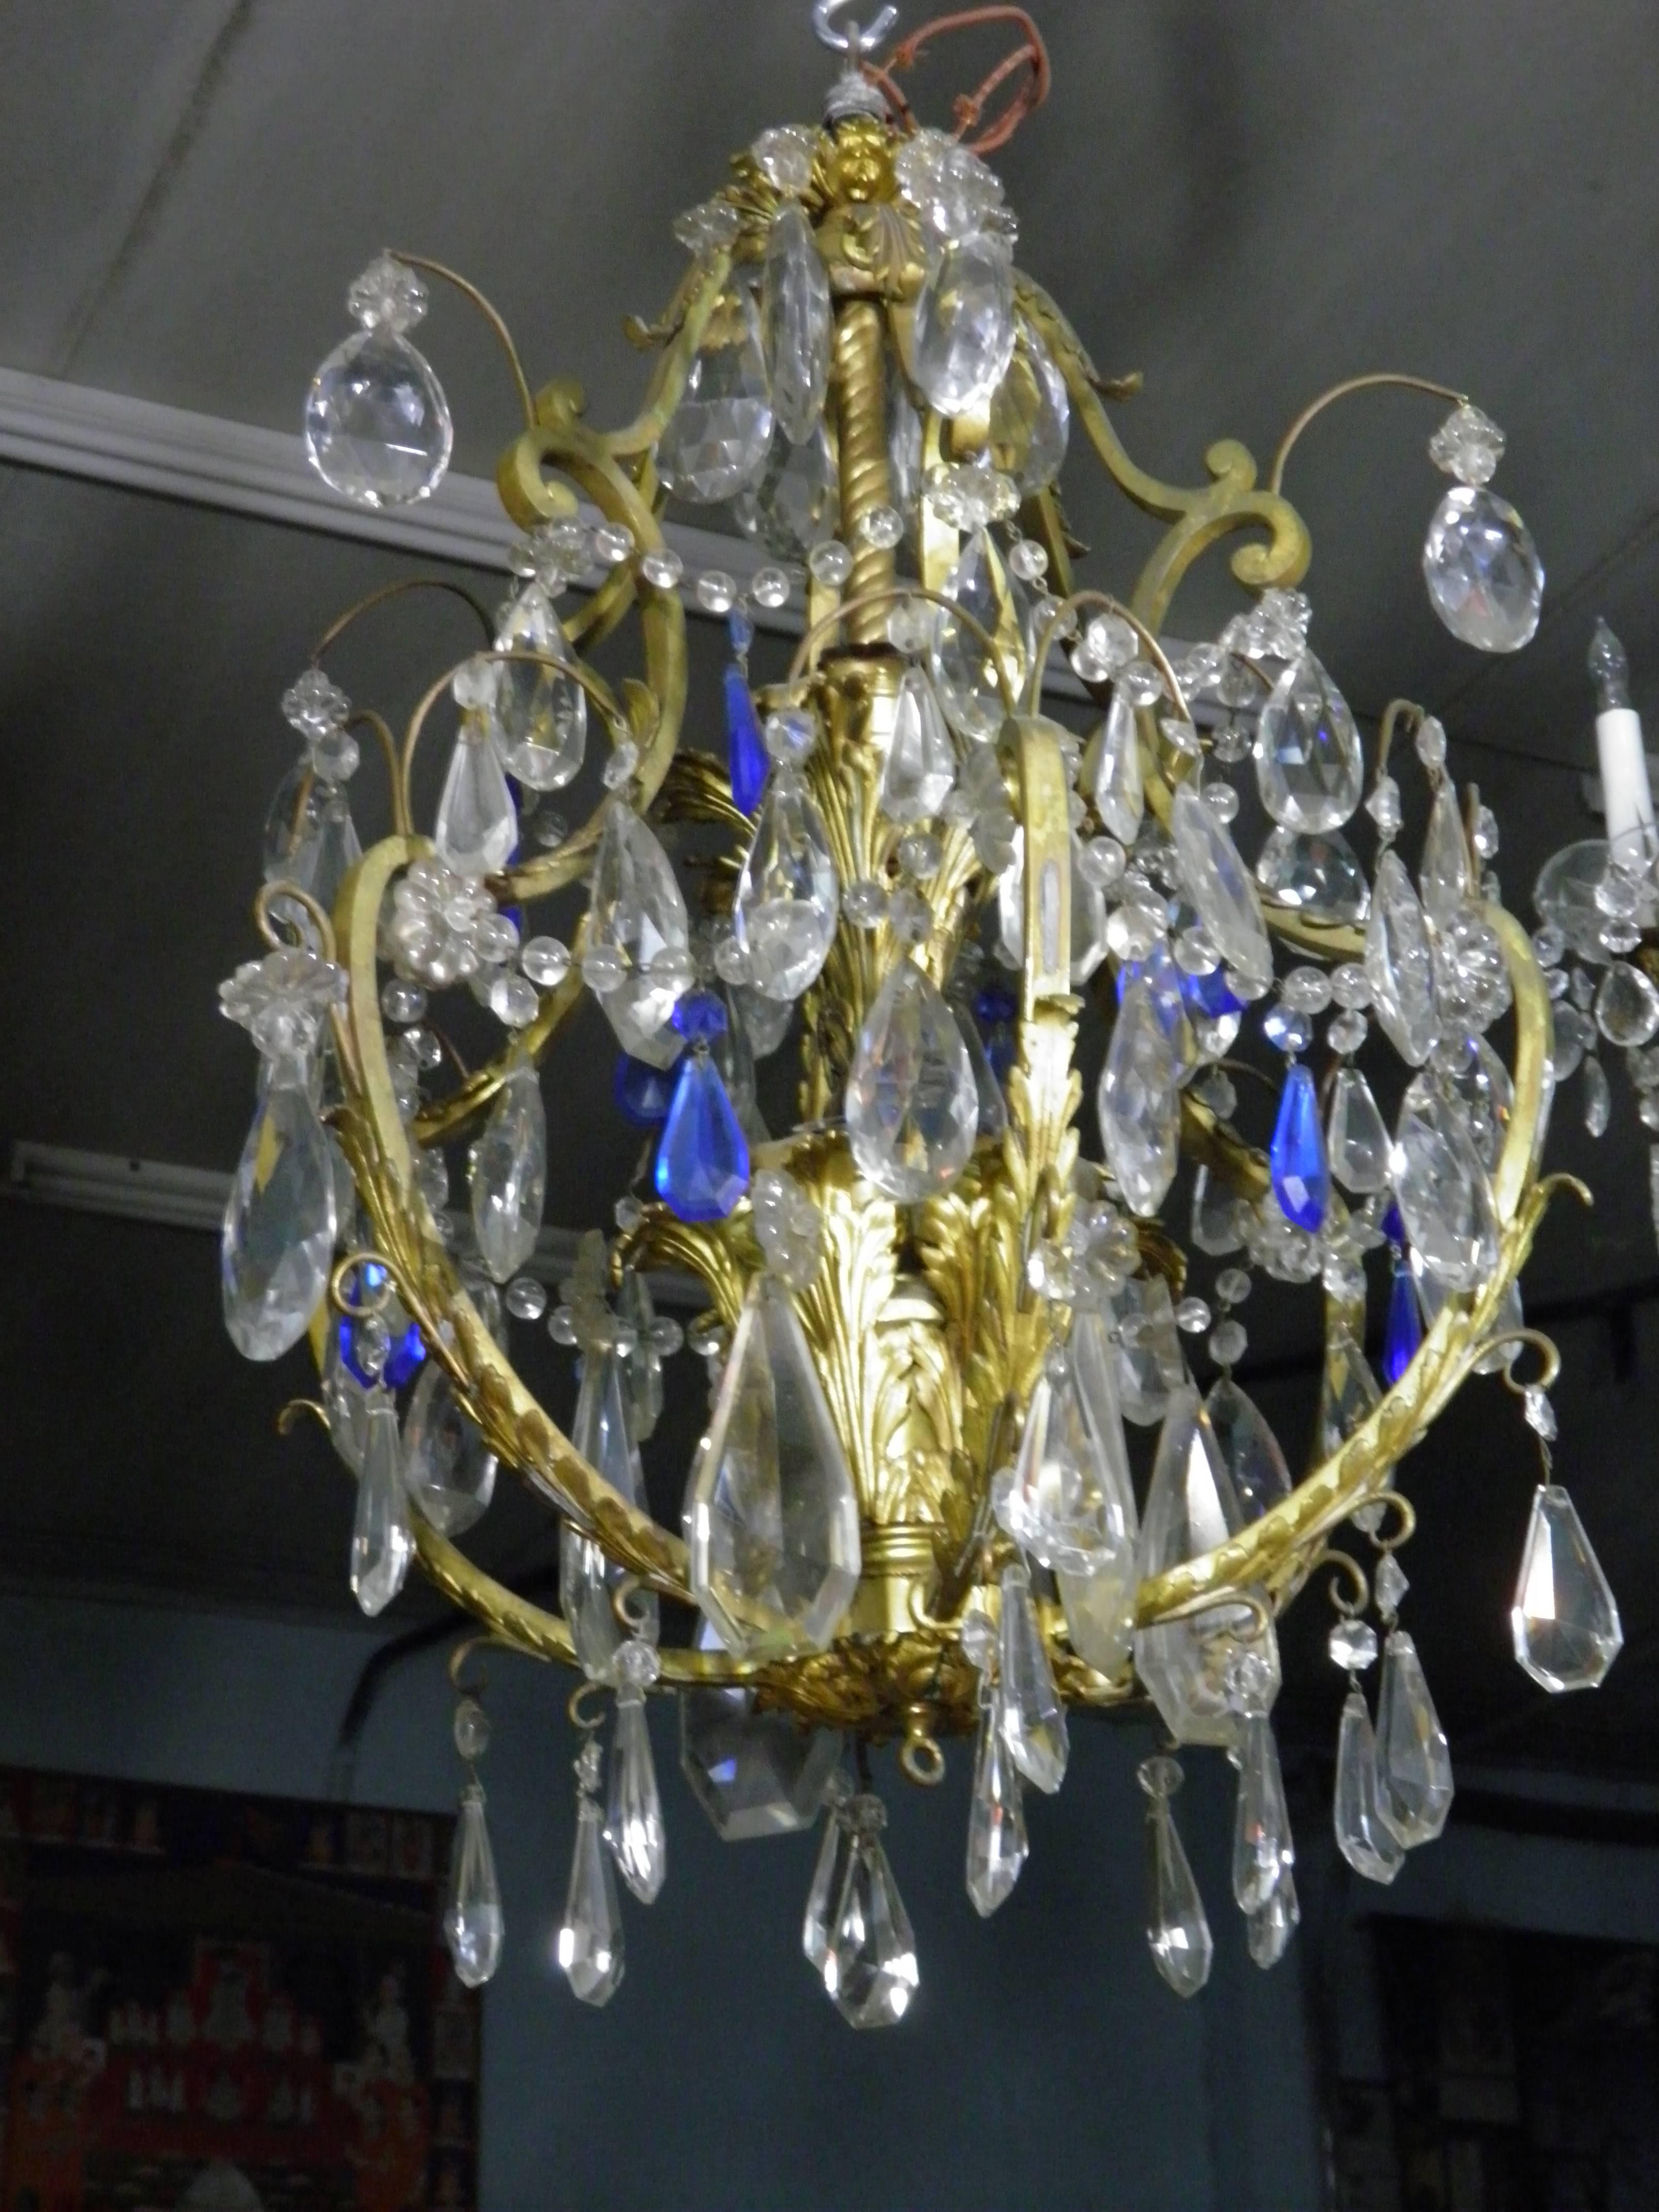 Live like a Rockefeller, celebrate Style and Vitality! So many gleaming blue and clear crystals hanging on this chandelier and 2 tiers of 5 each light bulbs- this chandelier is breathtaking!

Inspired One of a Kind Extraordinary Design of a Belle